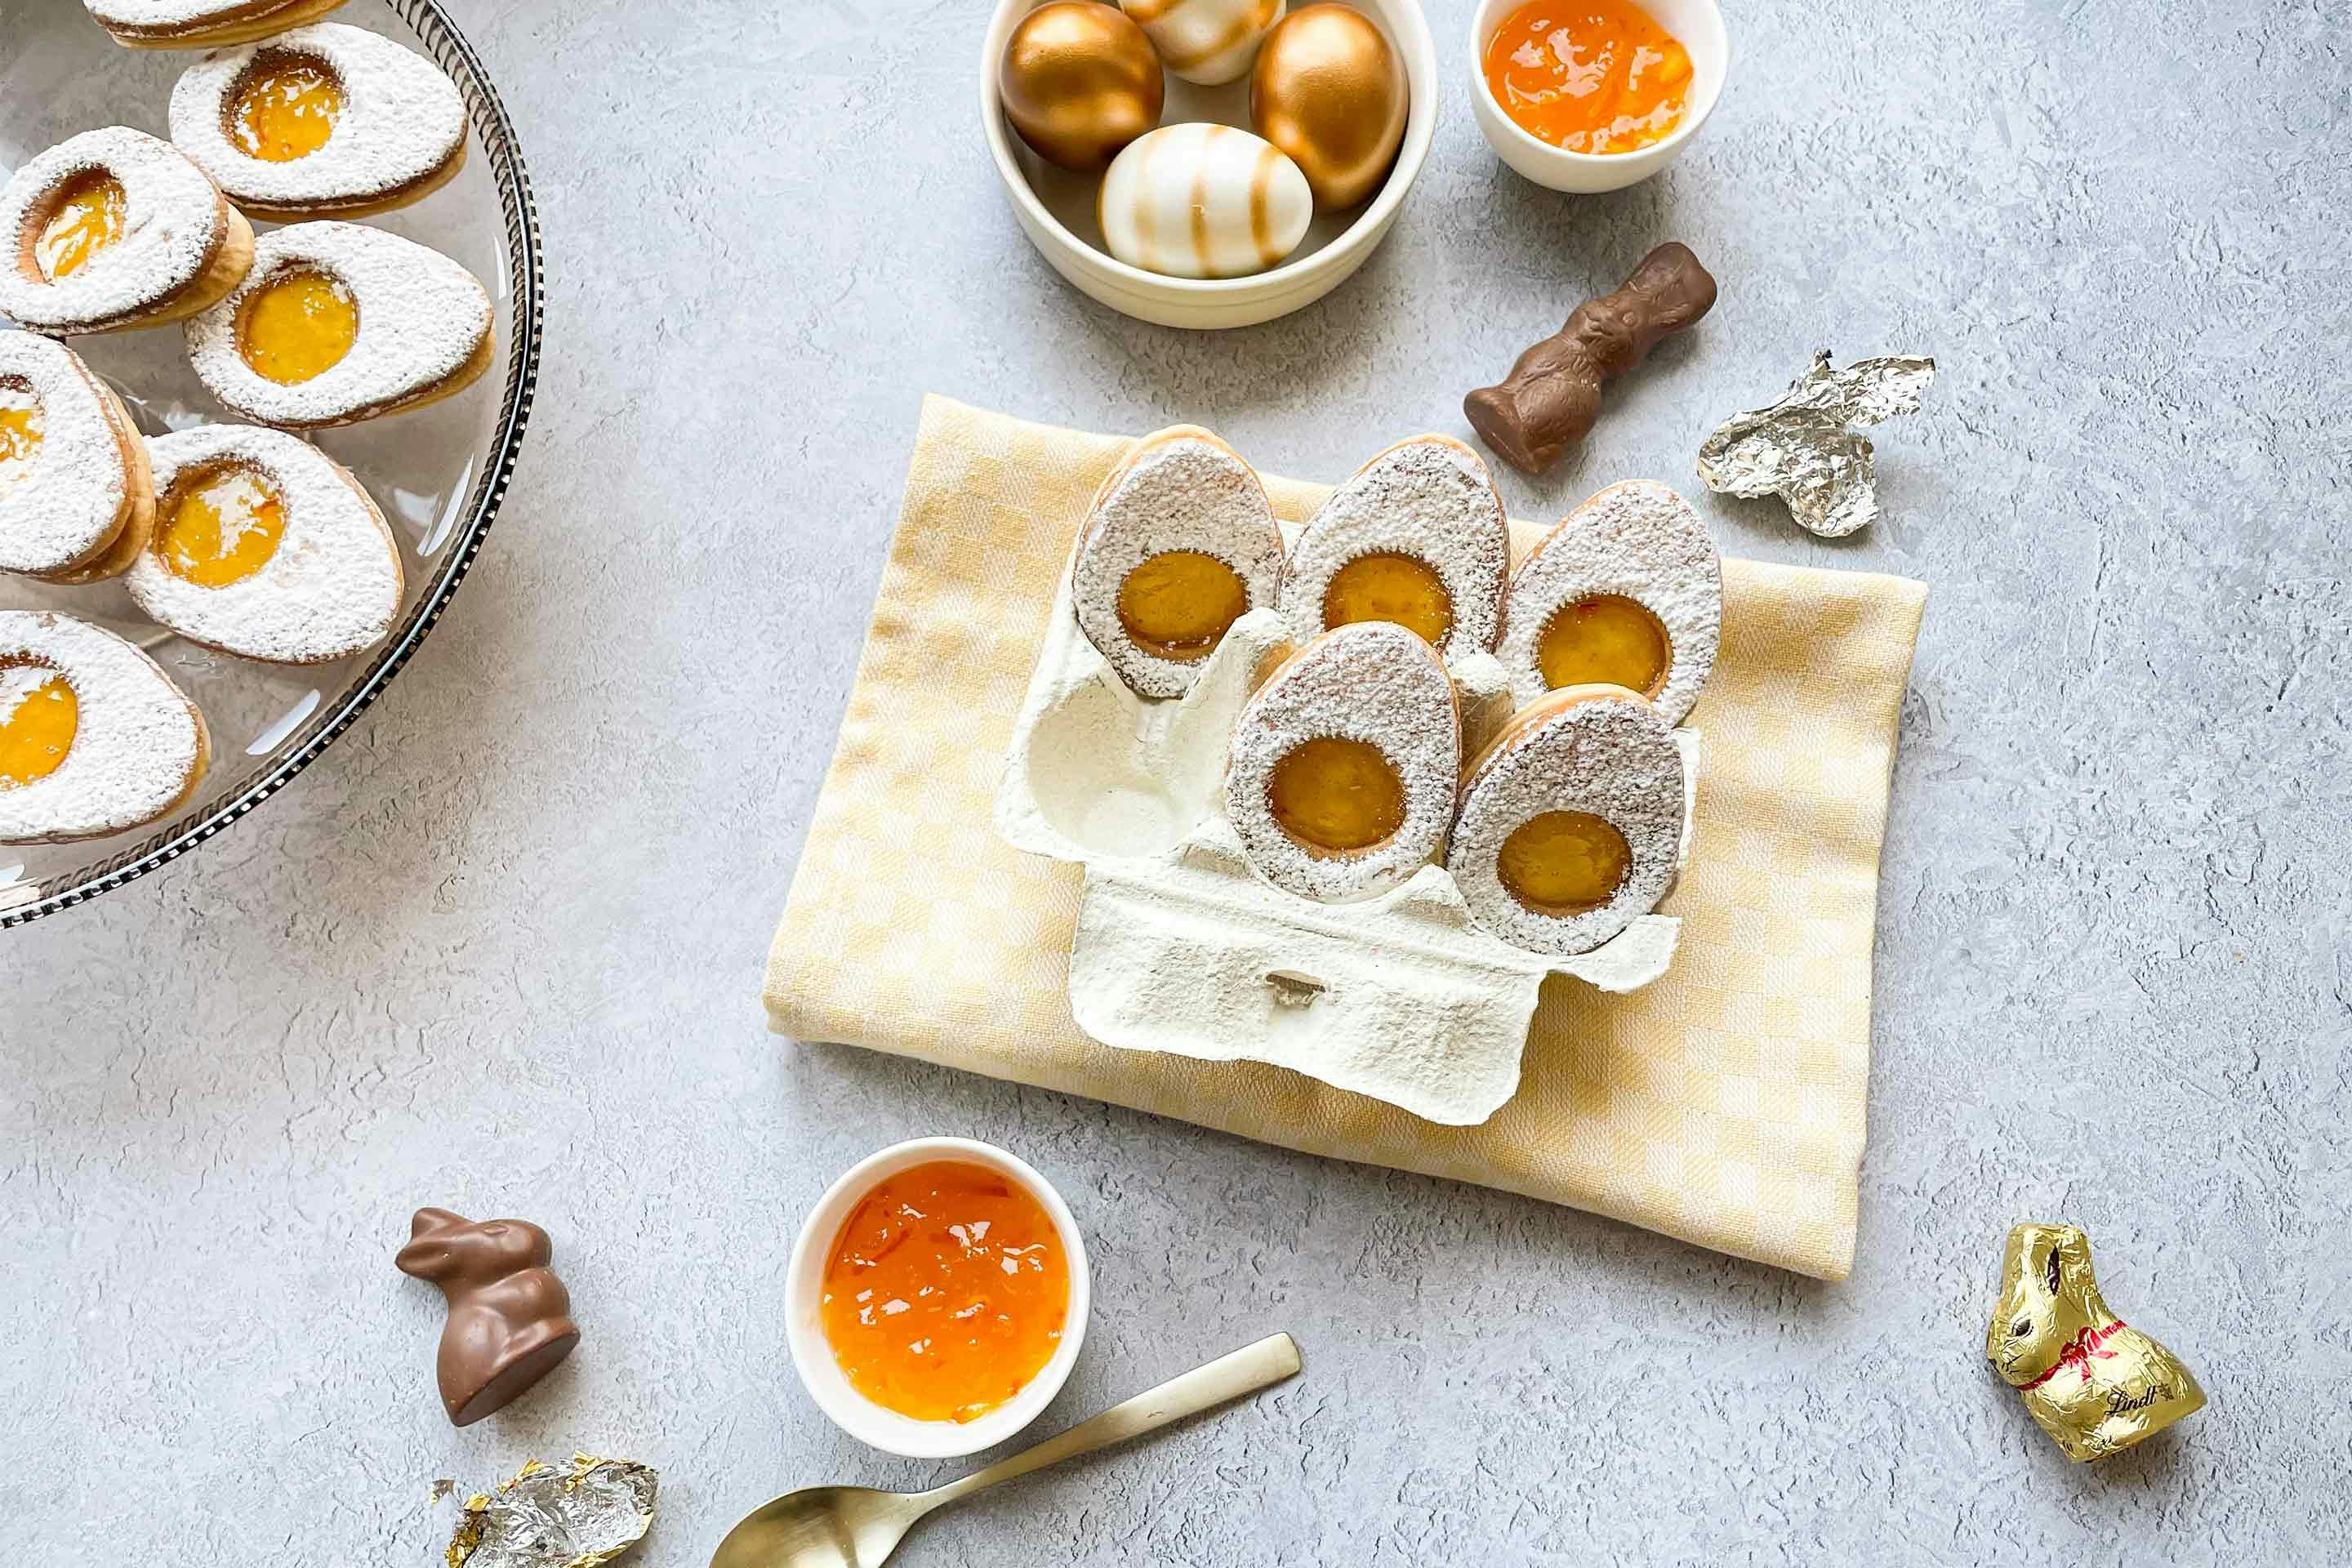 Easter egg shortbread biscuits filled with orange jam in an egg carton.